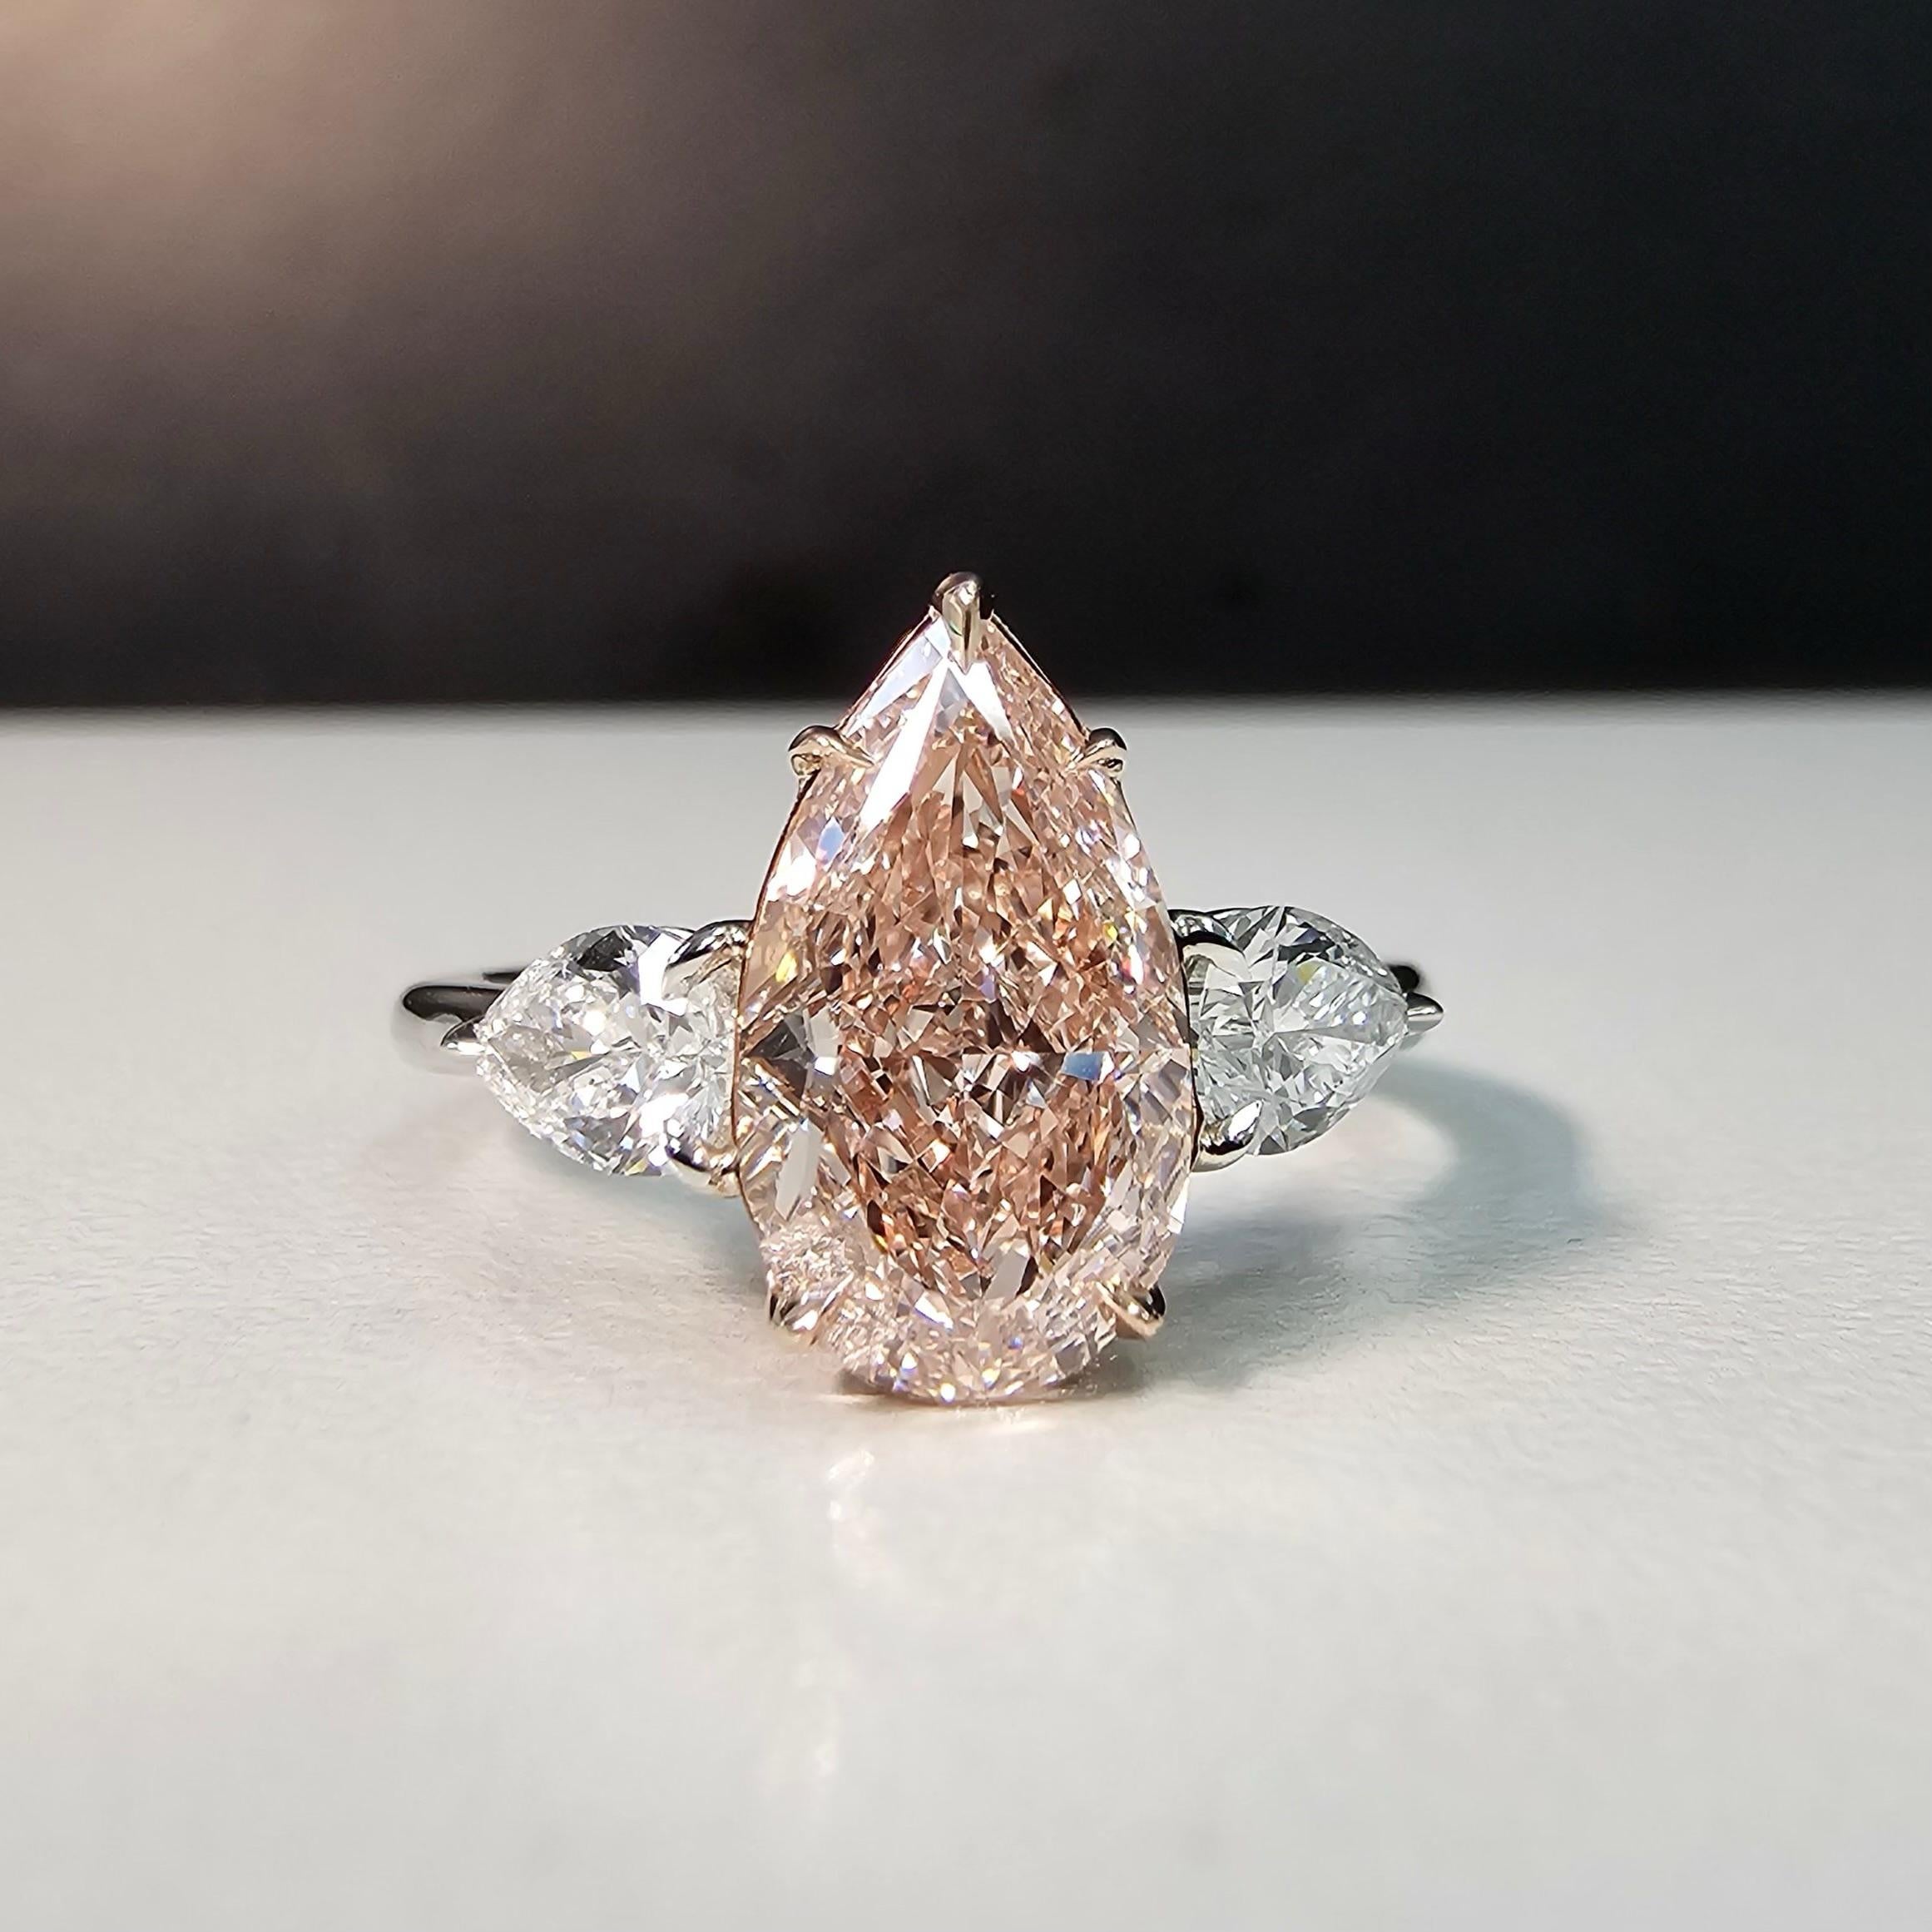 Sensational pear shape cut to perfection. Long model, zero bow tie, and absolutely on fire
Color is as sweet as brown pinks get, definitely see mainly pink
10/10 model 
Set in Platinum and Rose Gold with 0.61ct of G VS Pear shapes
This piece can be